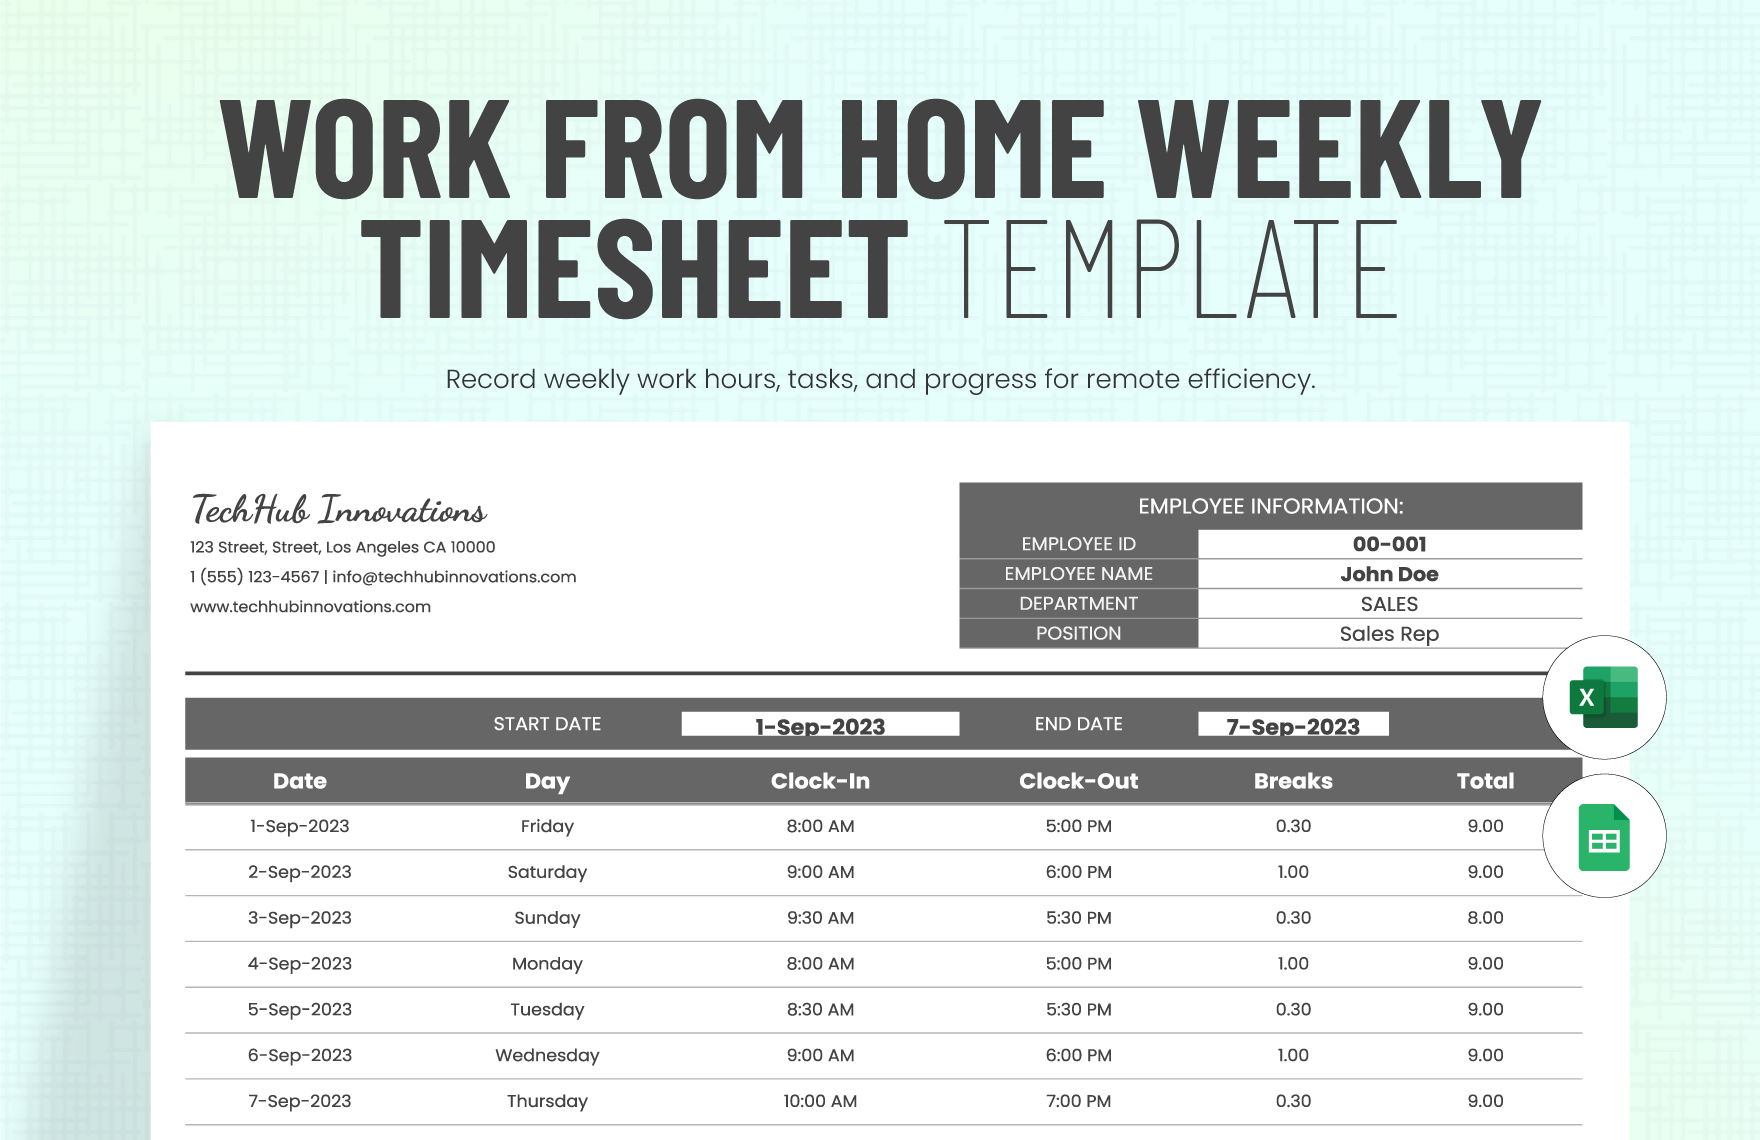 Work from Home Weekly Timesheet Template